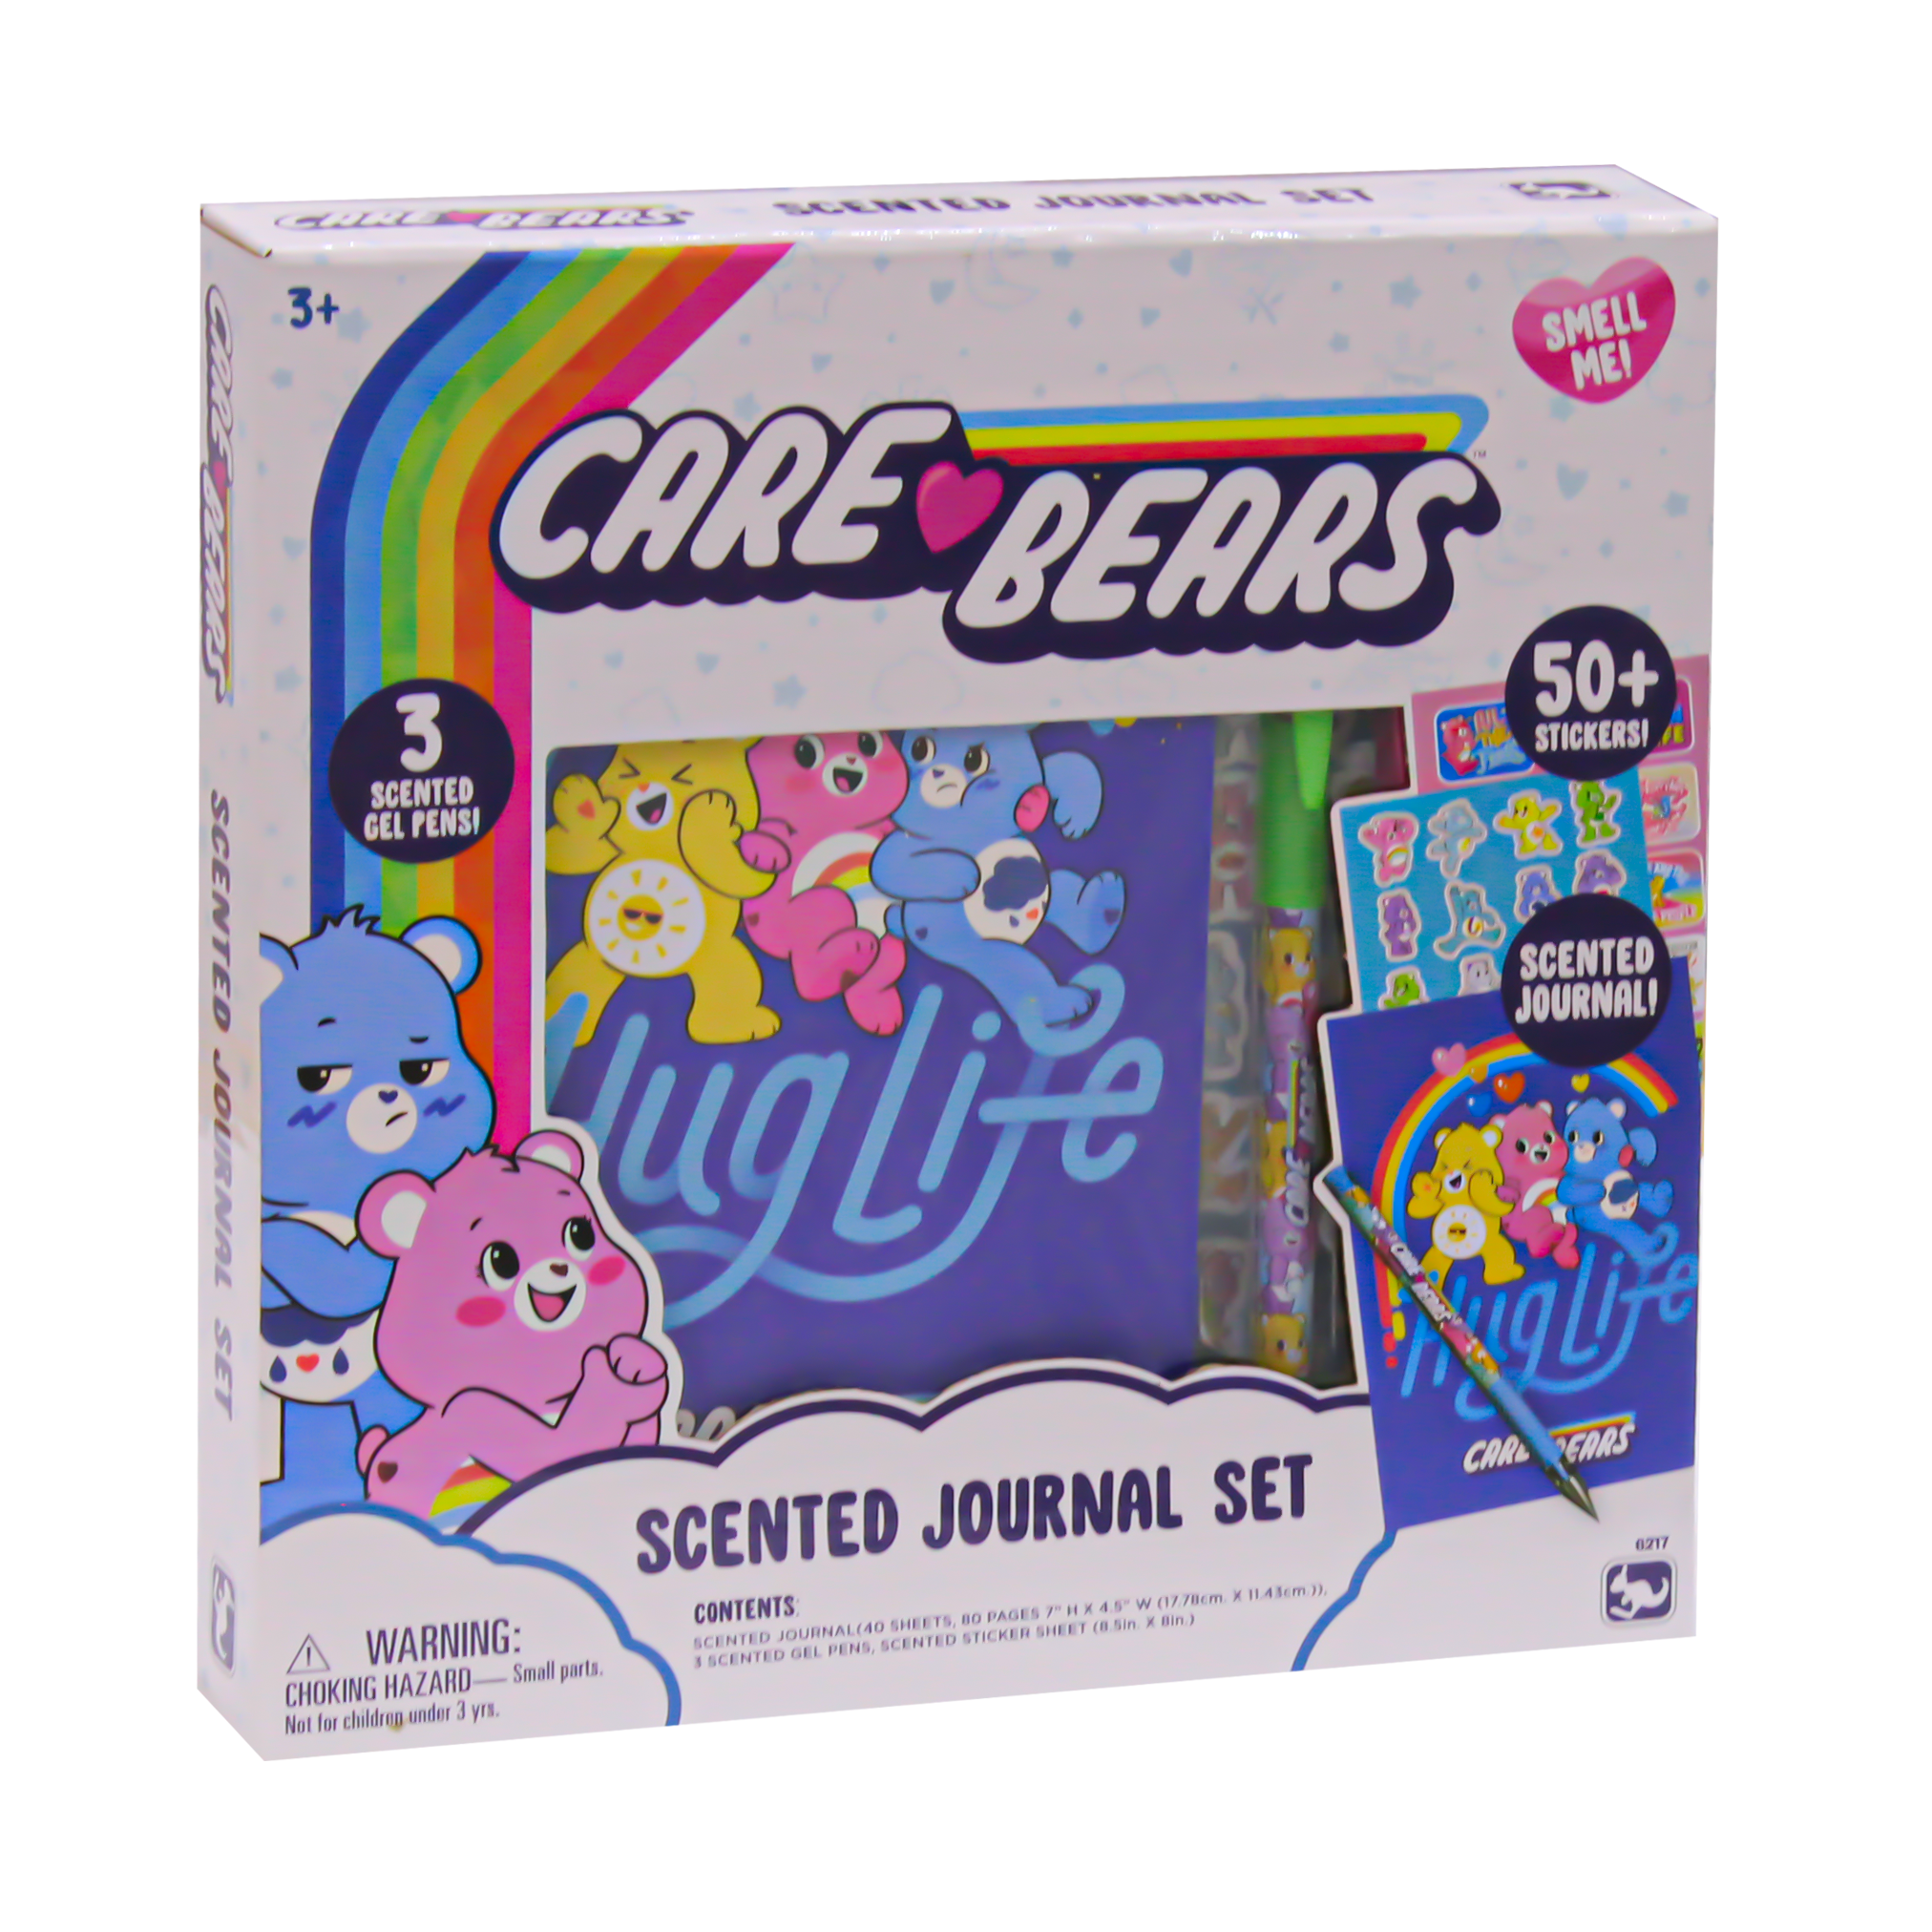 Scenticorns Scented Journal Set Care Bears For Travel and Creative Play for Kids Playtime